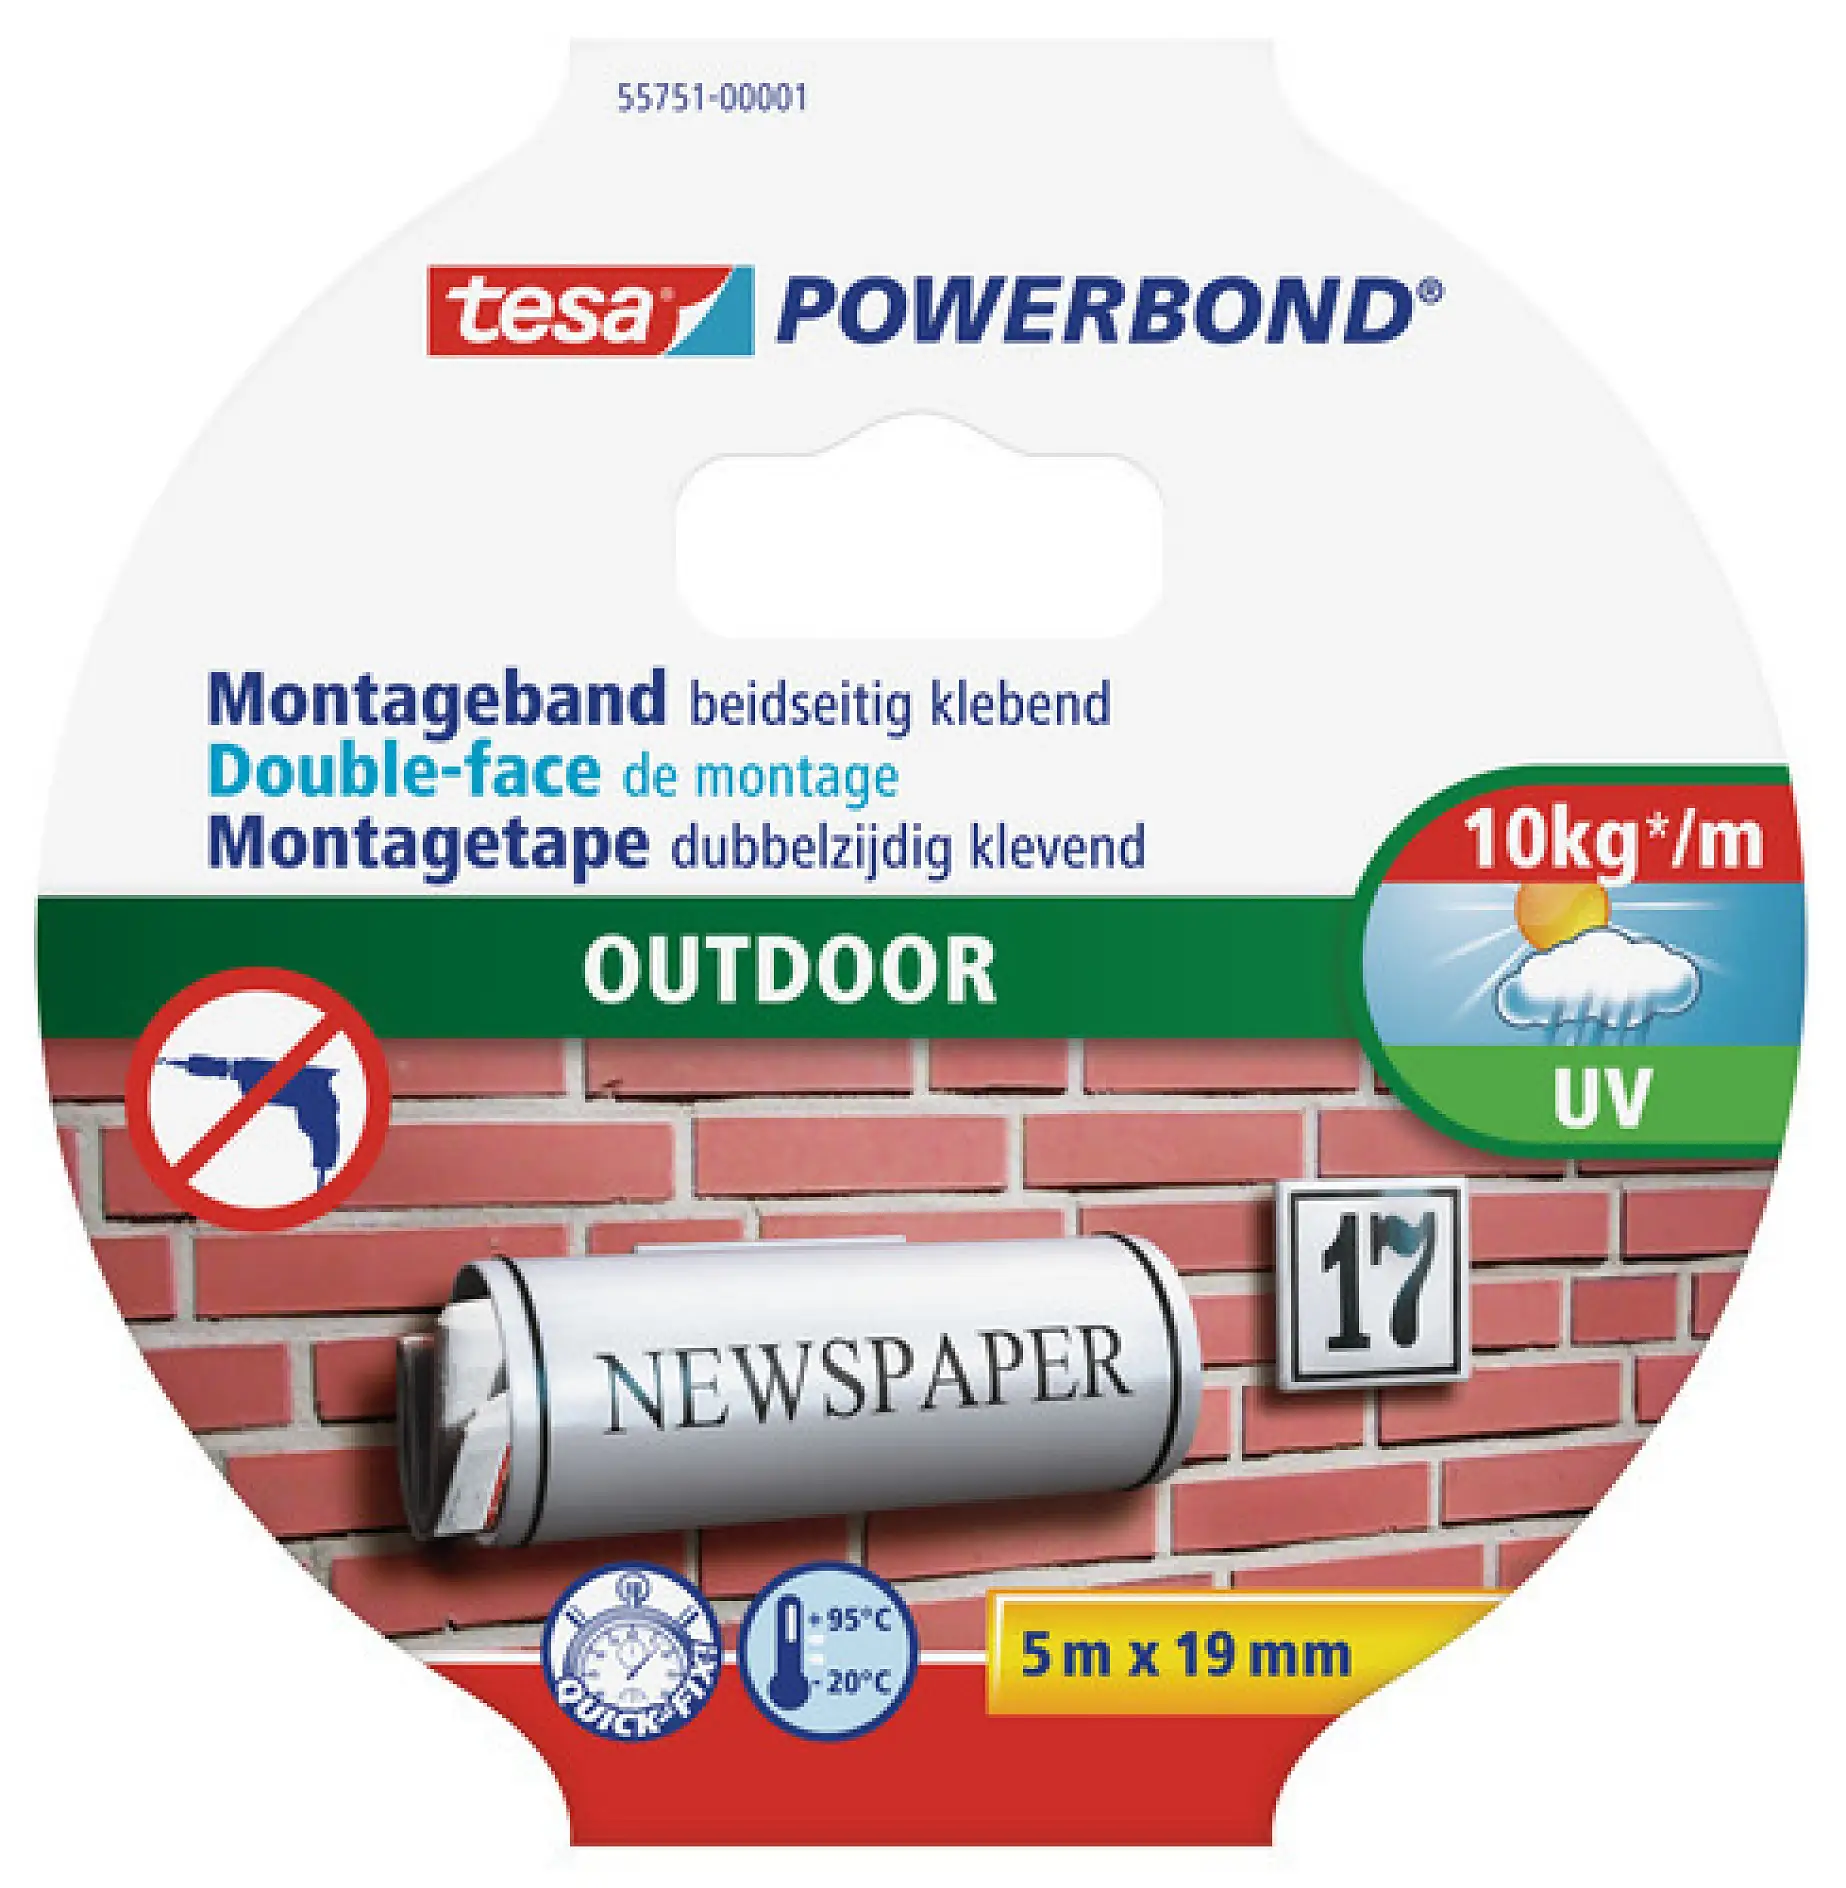 Attach things the easy way. Use tesa® Powerbond OUTDOOR and forget about nails, screws and drilling holes.
tesa® Powerbond OUTDOOR is a double-sided self-adhesive mounting tape suitable for a wide range of outdoor applications. It is not only weather-resistant, but also resistant against UV rays, water and adverse temperatures.
Use it to securely fix any flat object with a thickness of up to 10 mm. In good adhesive conditions, a strip of just 10 cm of this heavy-duty fixing tape is enough to hold a weight of up to 1 kg.